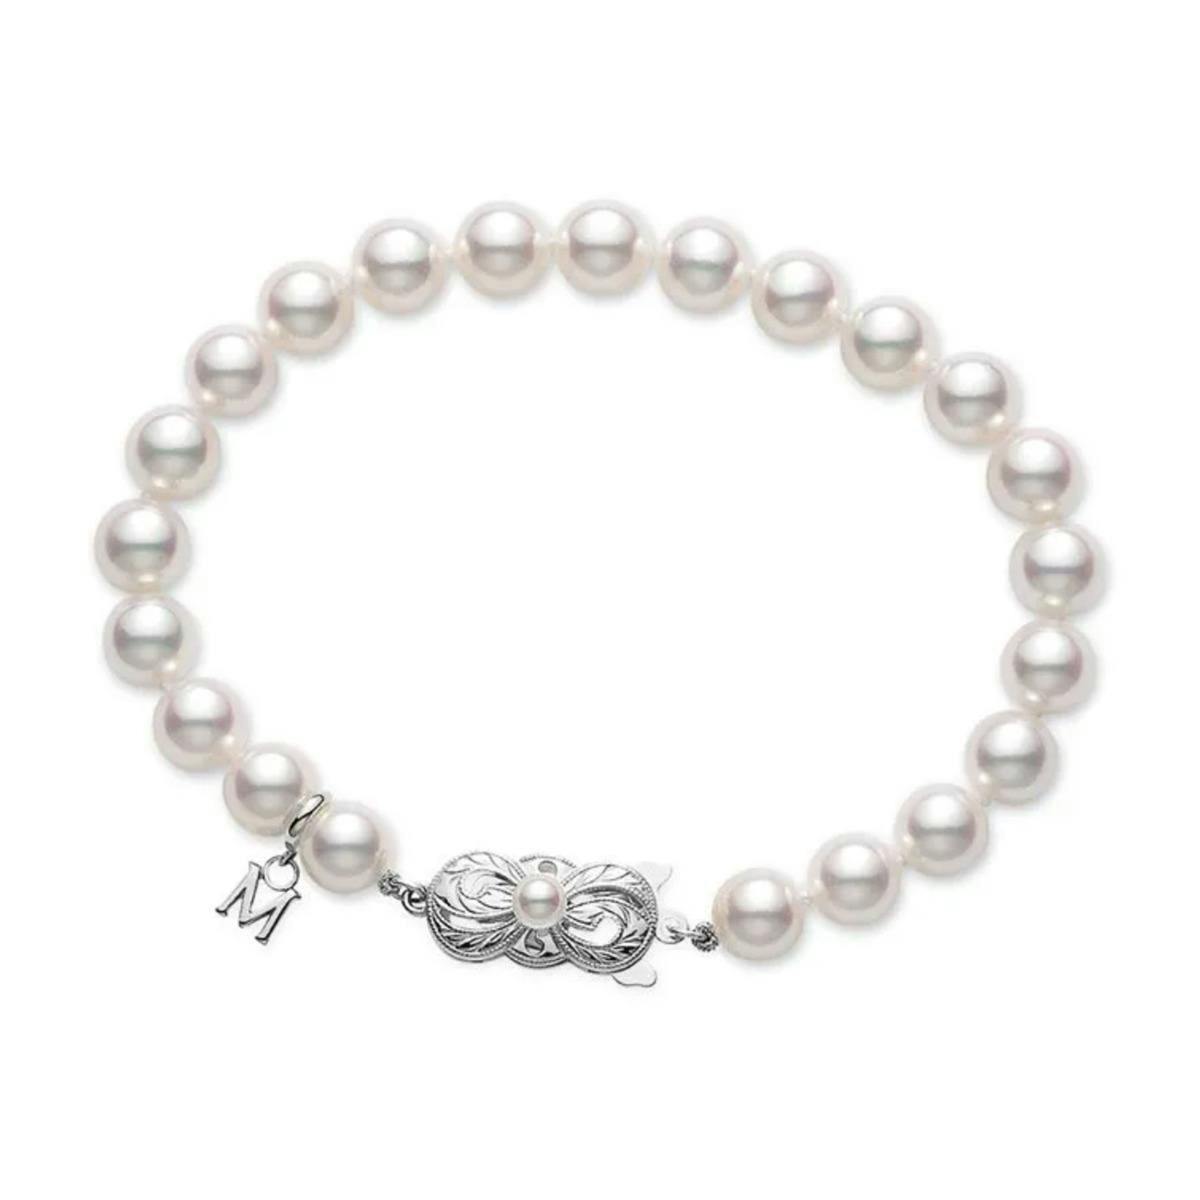 Mikimoto 7.5-7mm "A" Pearl Strand Bracelet in White Gold 0